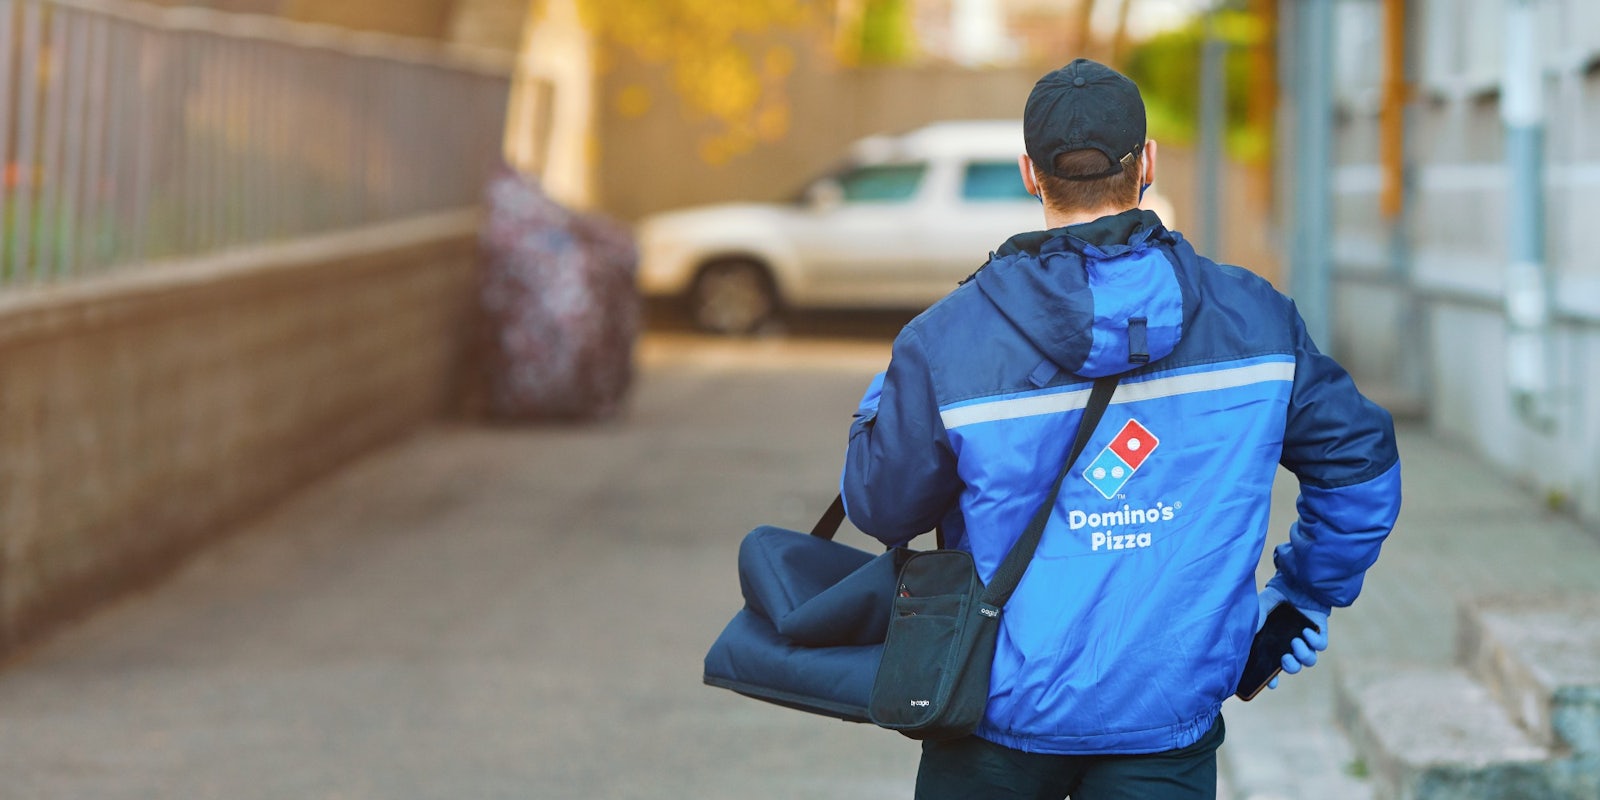 TikToker says Domino's delivery man refused to leave her house.